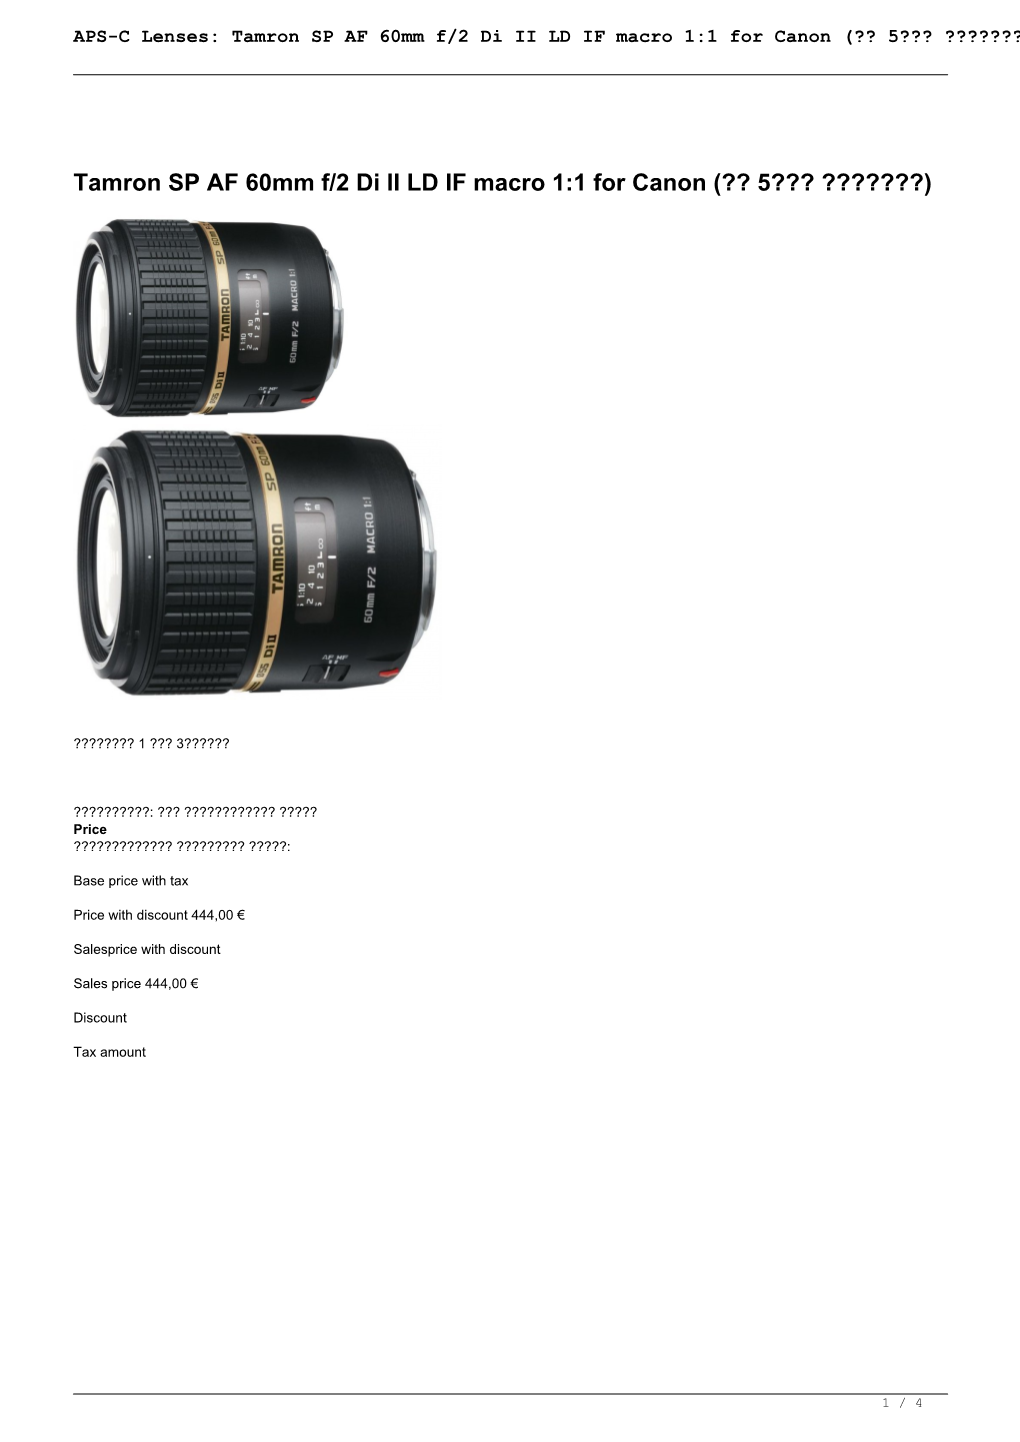 APS-C Lenses: Tamron SP AF 60Mm F/2 Di II LD IF Macro 1:1 for Canon (?? 5??? ???????)